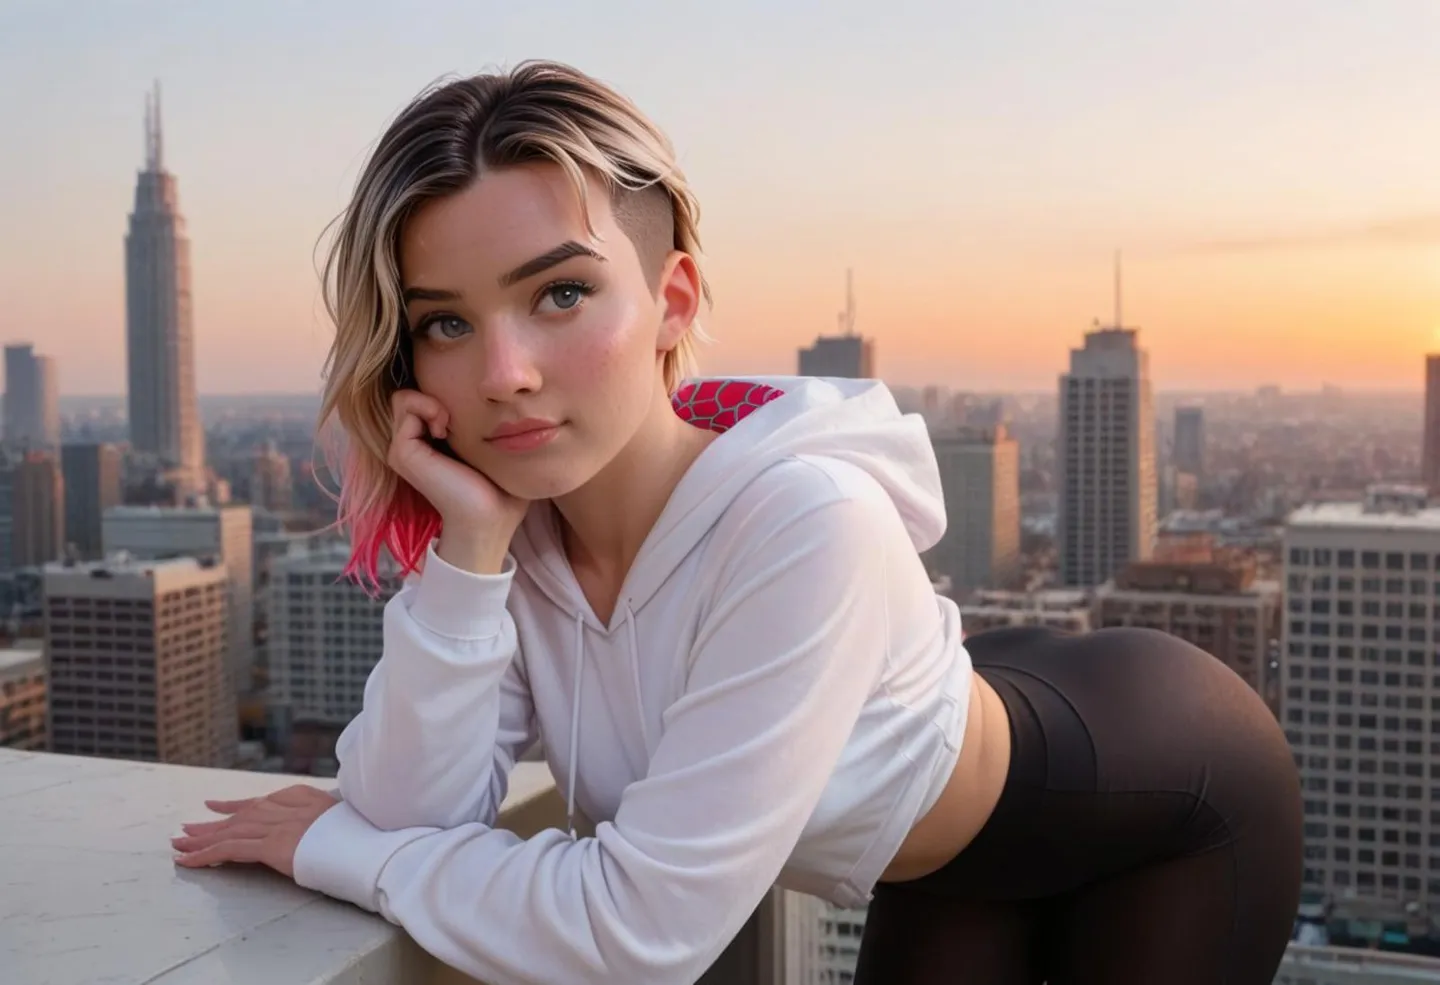 A woman with short hair, shaved sides, and wearing a white hoodie and black leggings, leaning on a rooftop ledge during sunset in a cityscape, AI generated using Stable Diffusion.